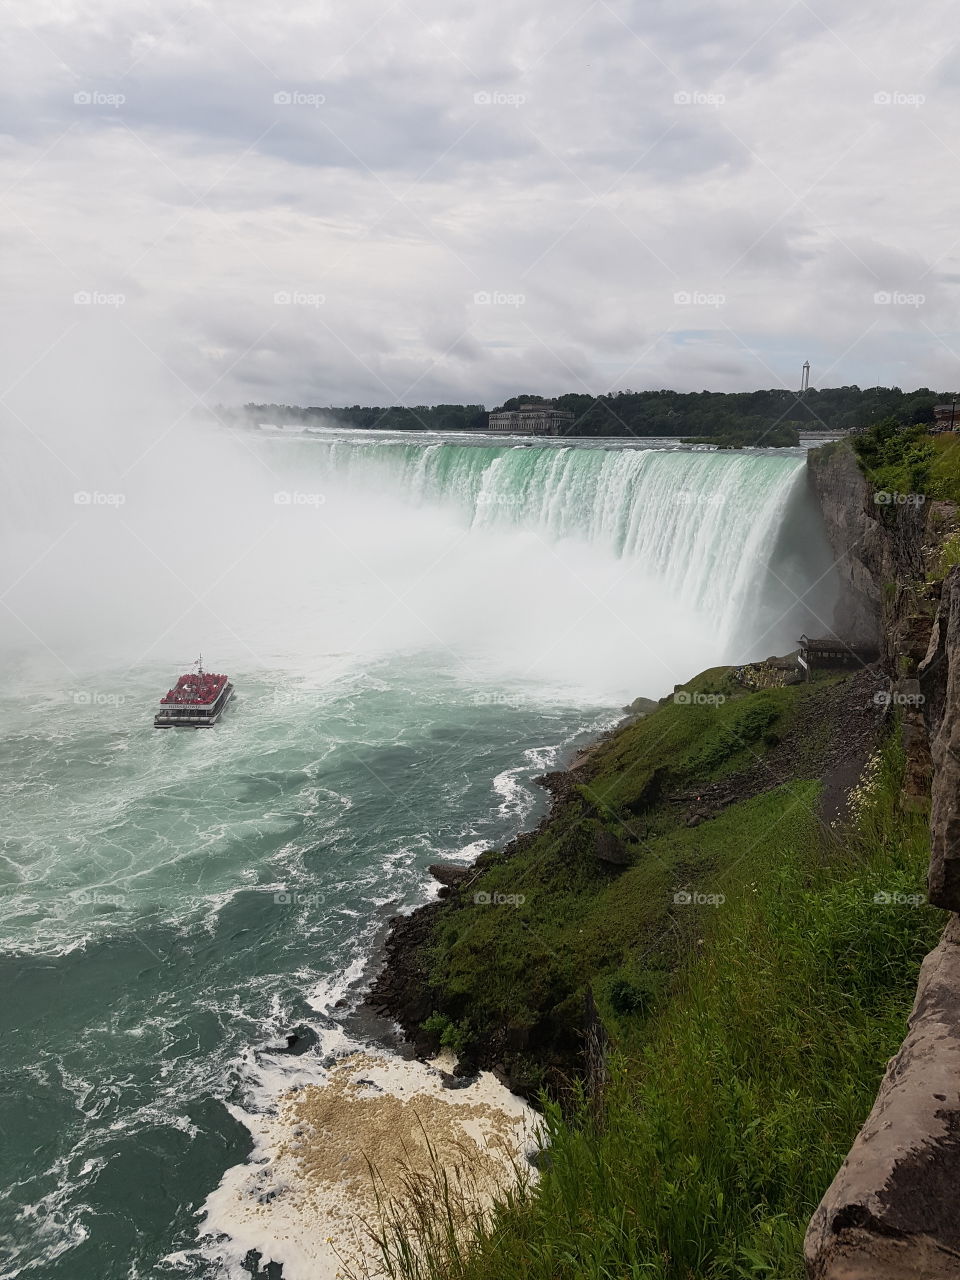 A shot of the maid of the mist tour boat in Niagara Falls, Ontario headed to get a close up of this massive waterfall.